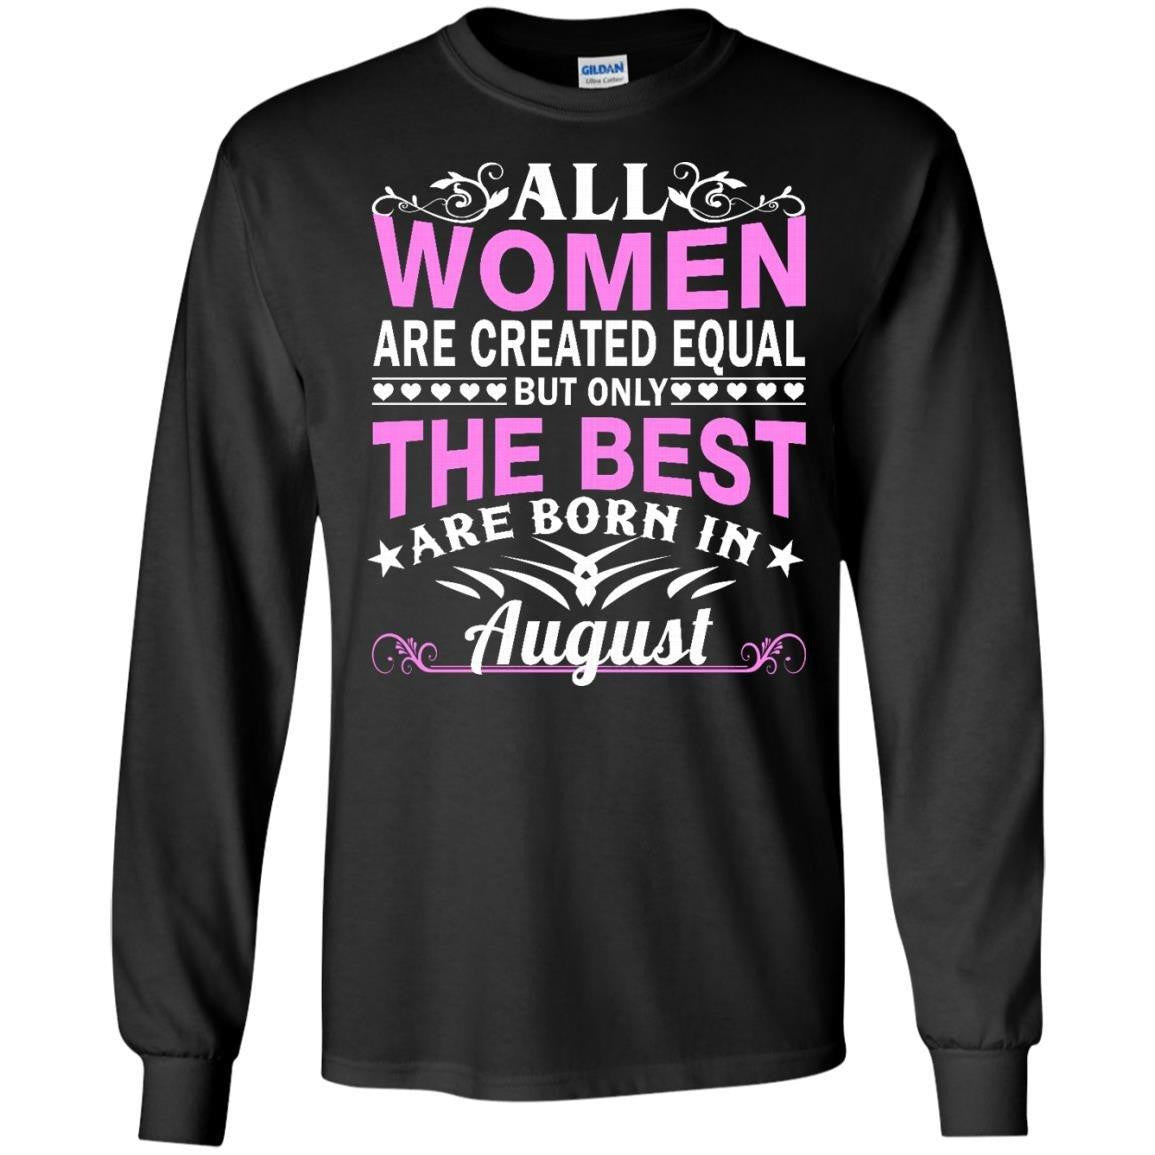 All Women Are Created Equal But Only The Best Are Born In August shirt